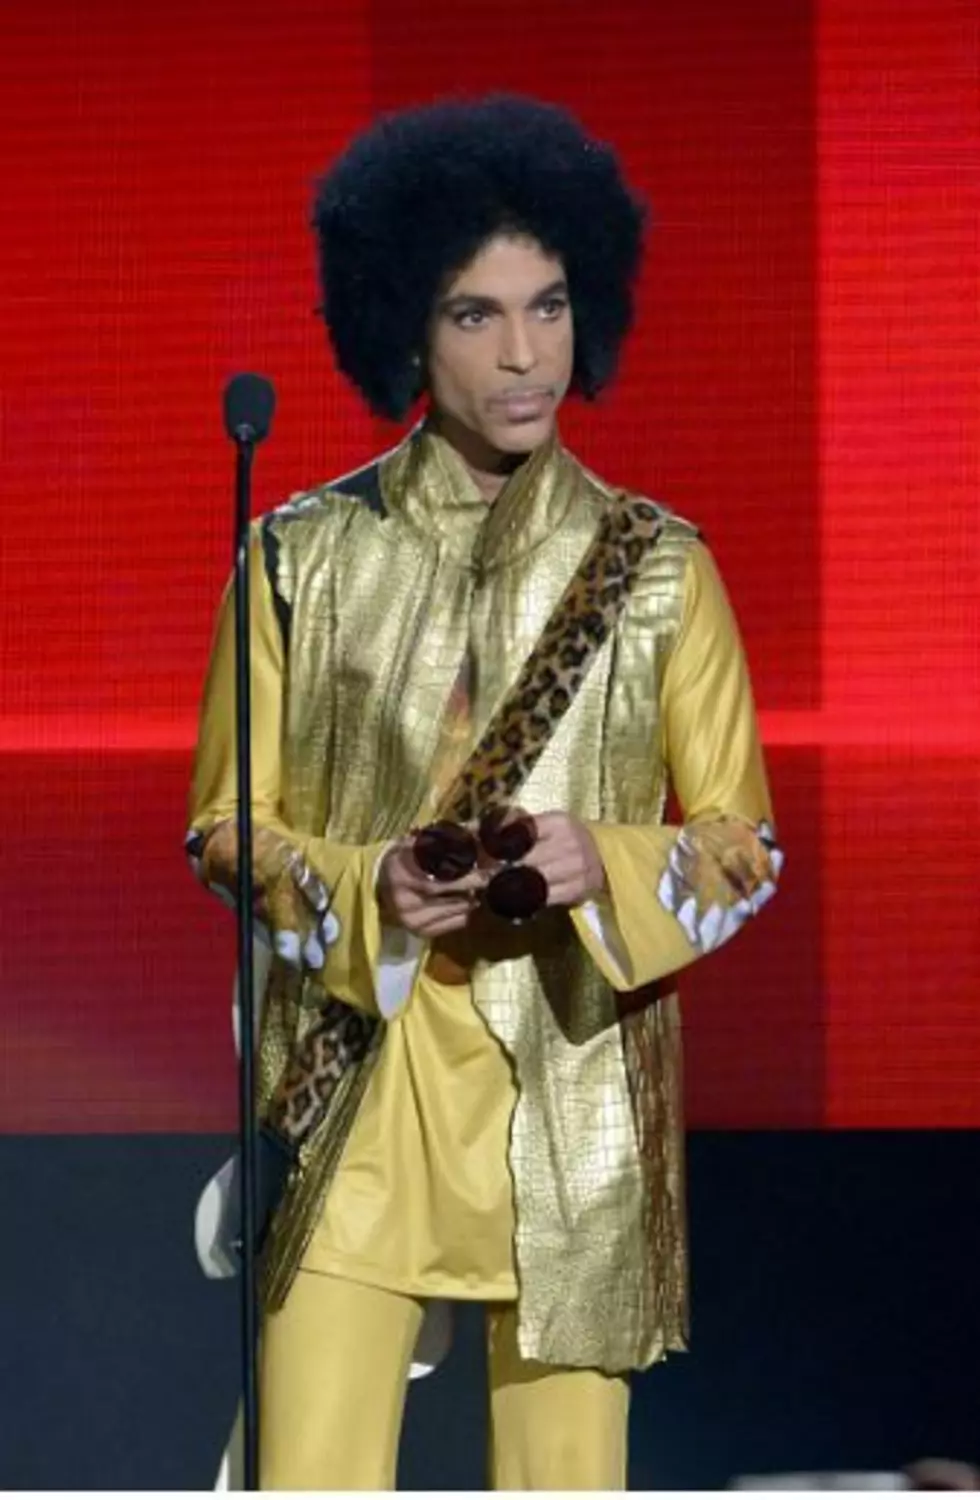 Man Claims to be Prince’s Son